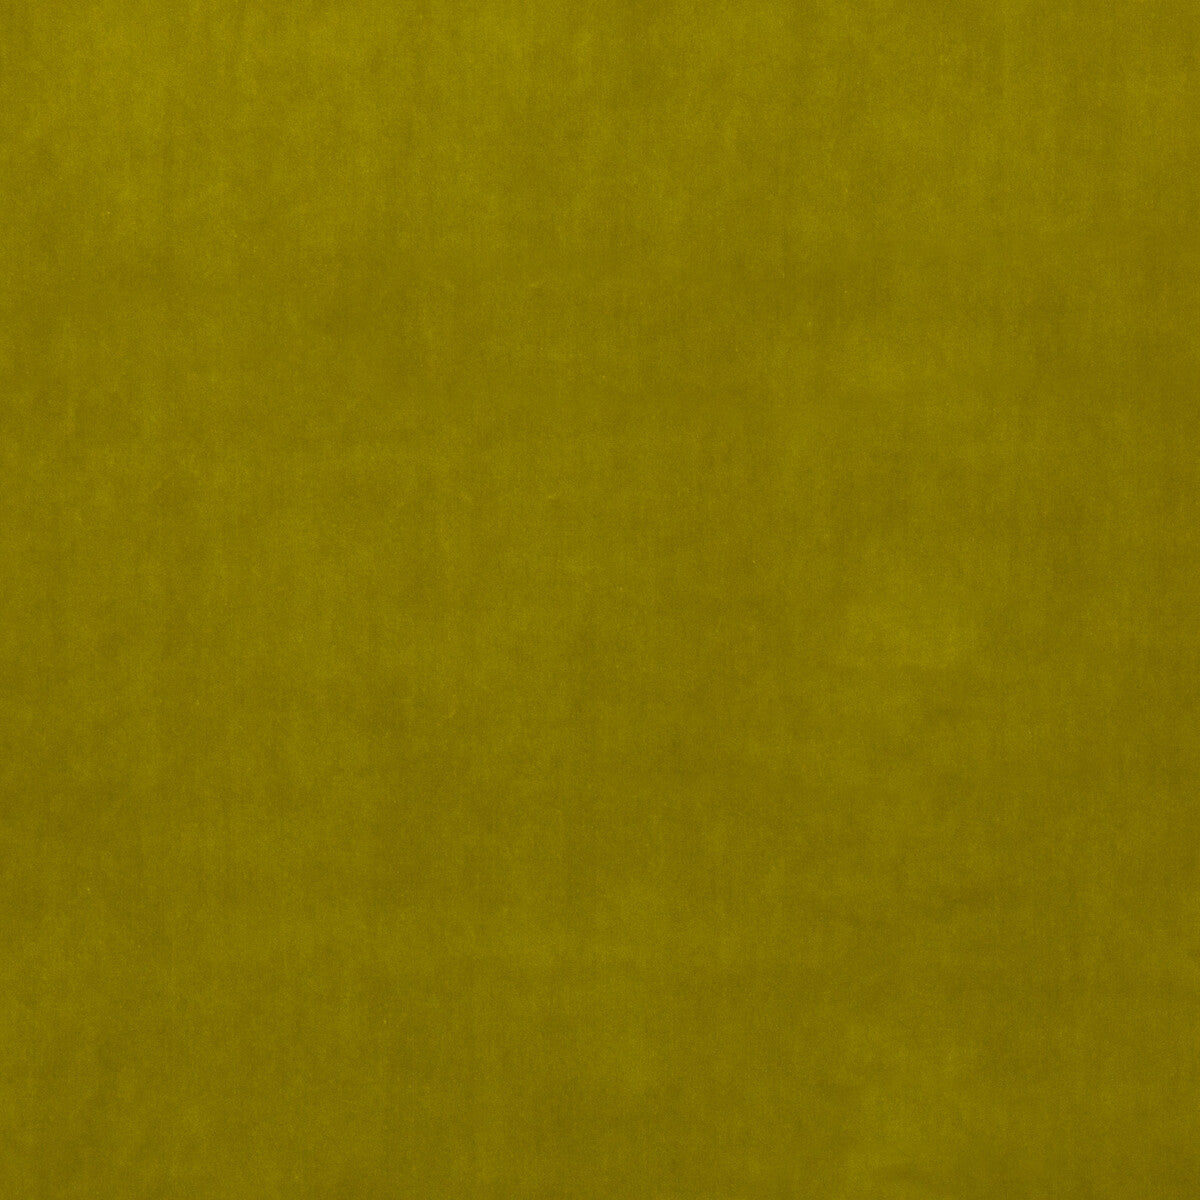 Lyla Velvet fabric in lime color - pattern 35825.755.0 - by Kravet Contract in the Riviera Velvet collection